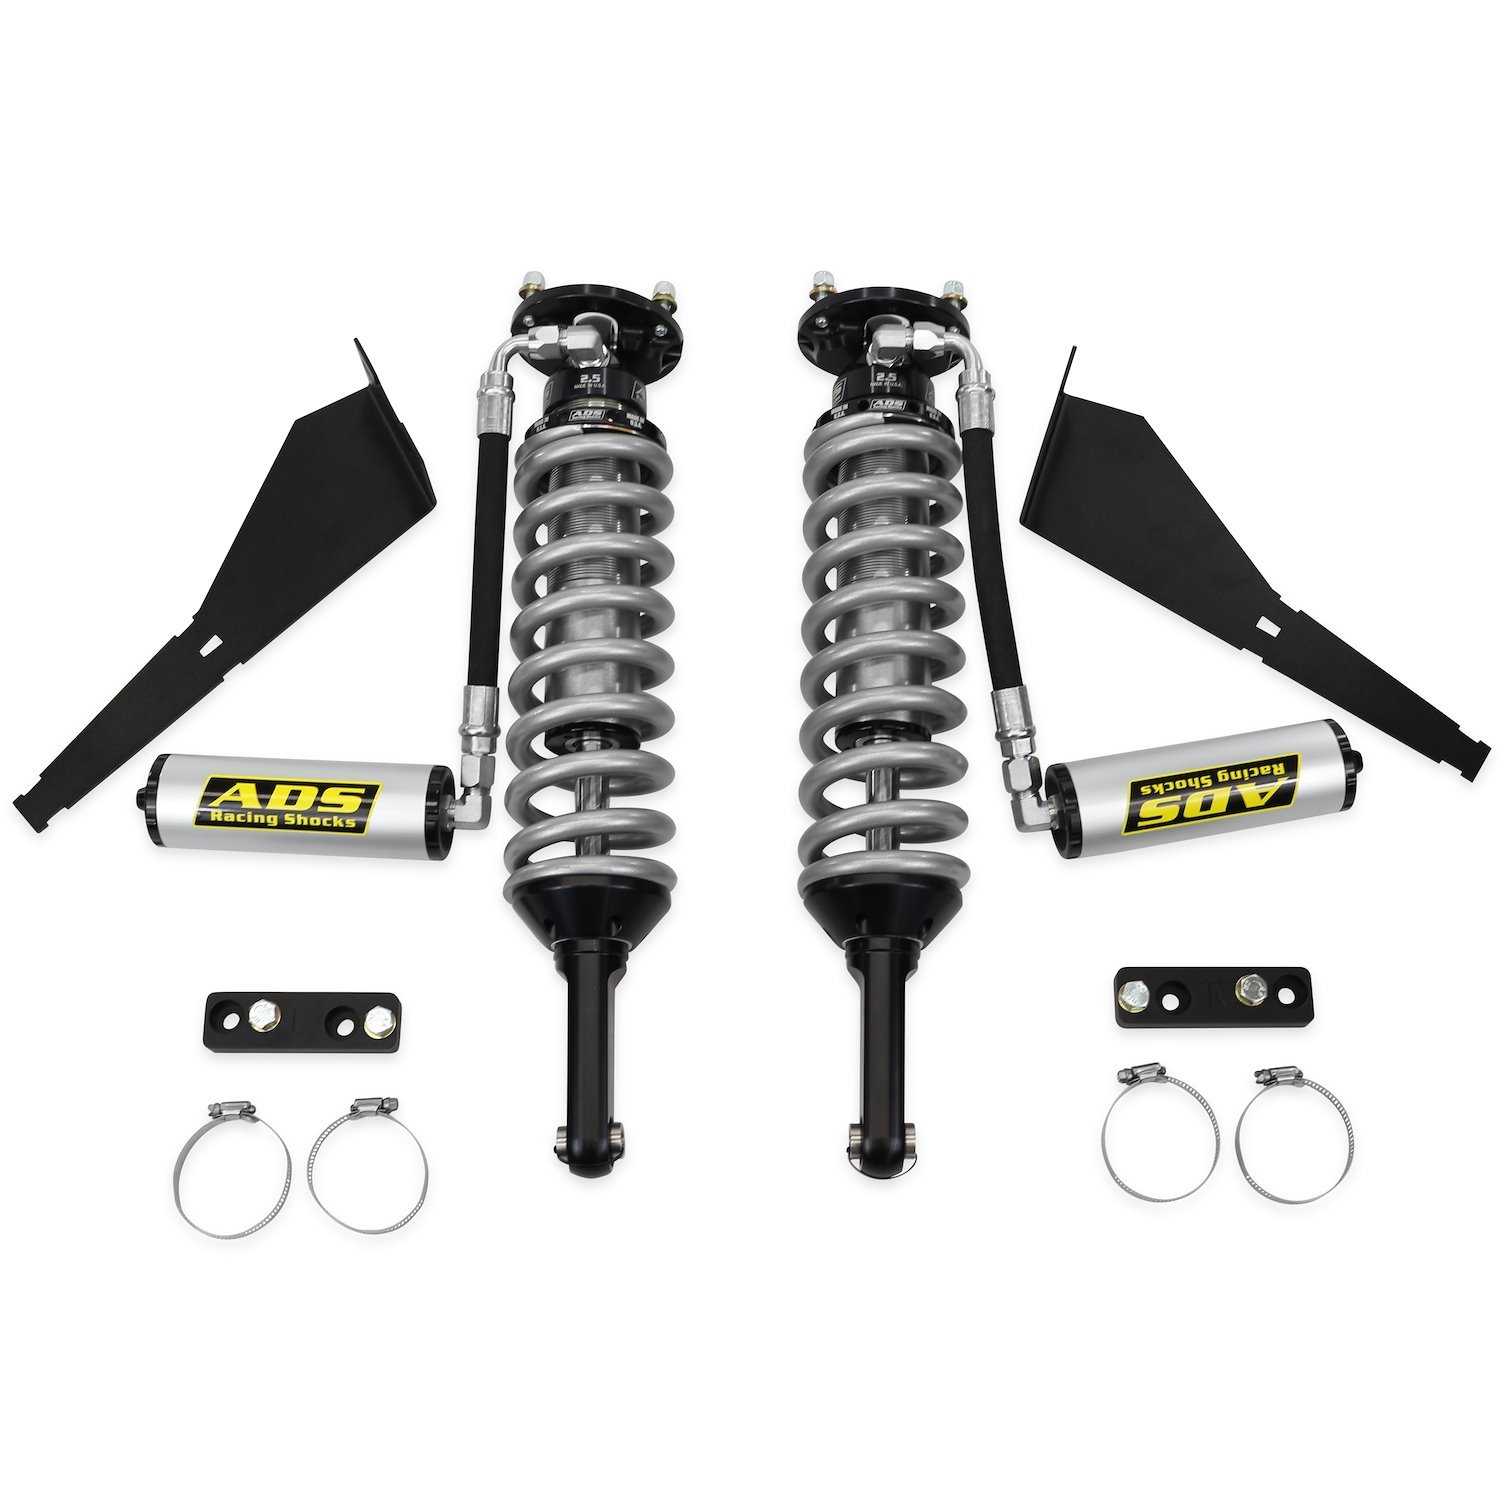 250-ZR20F-A60 Racing Bolt-On Shocks, Fits Select Chevy Colorado/GMC Canyon ZR2, 2.5 in., w/ Remote Reservoir, 0-2 in. Lift